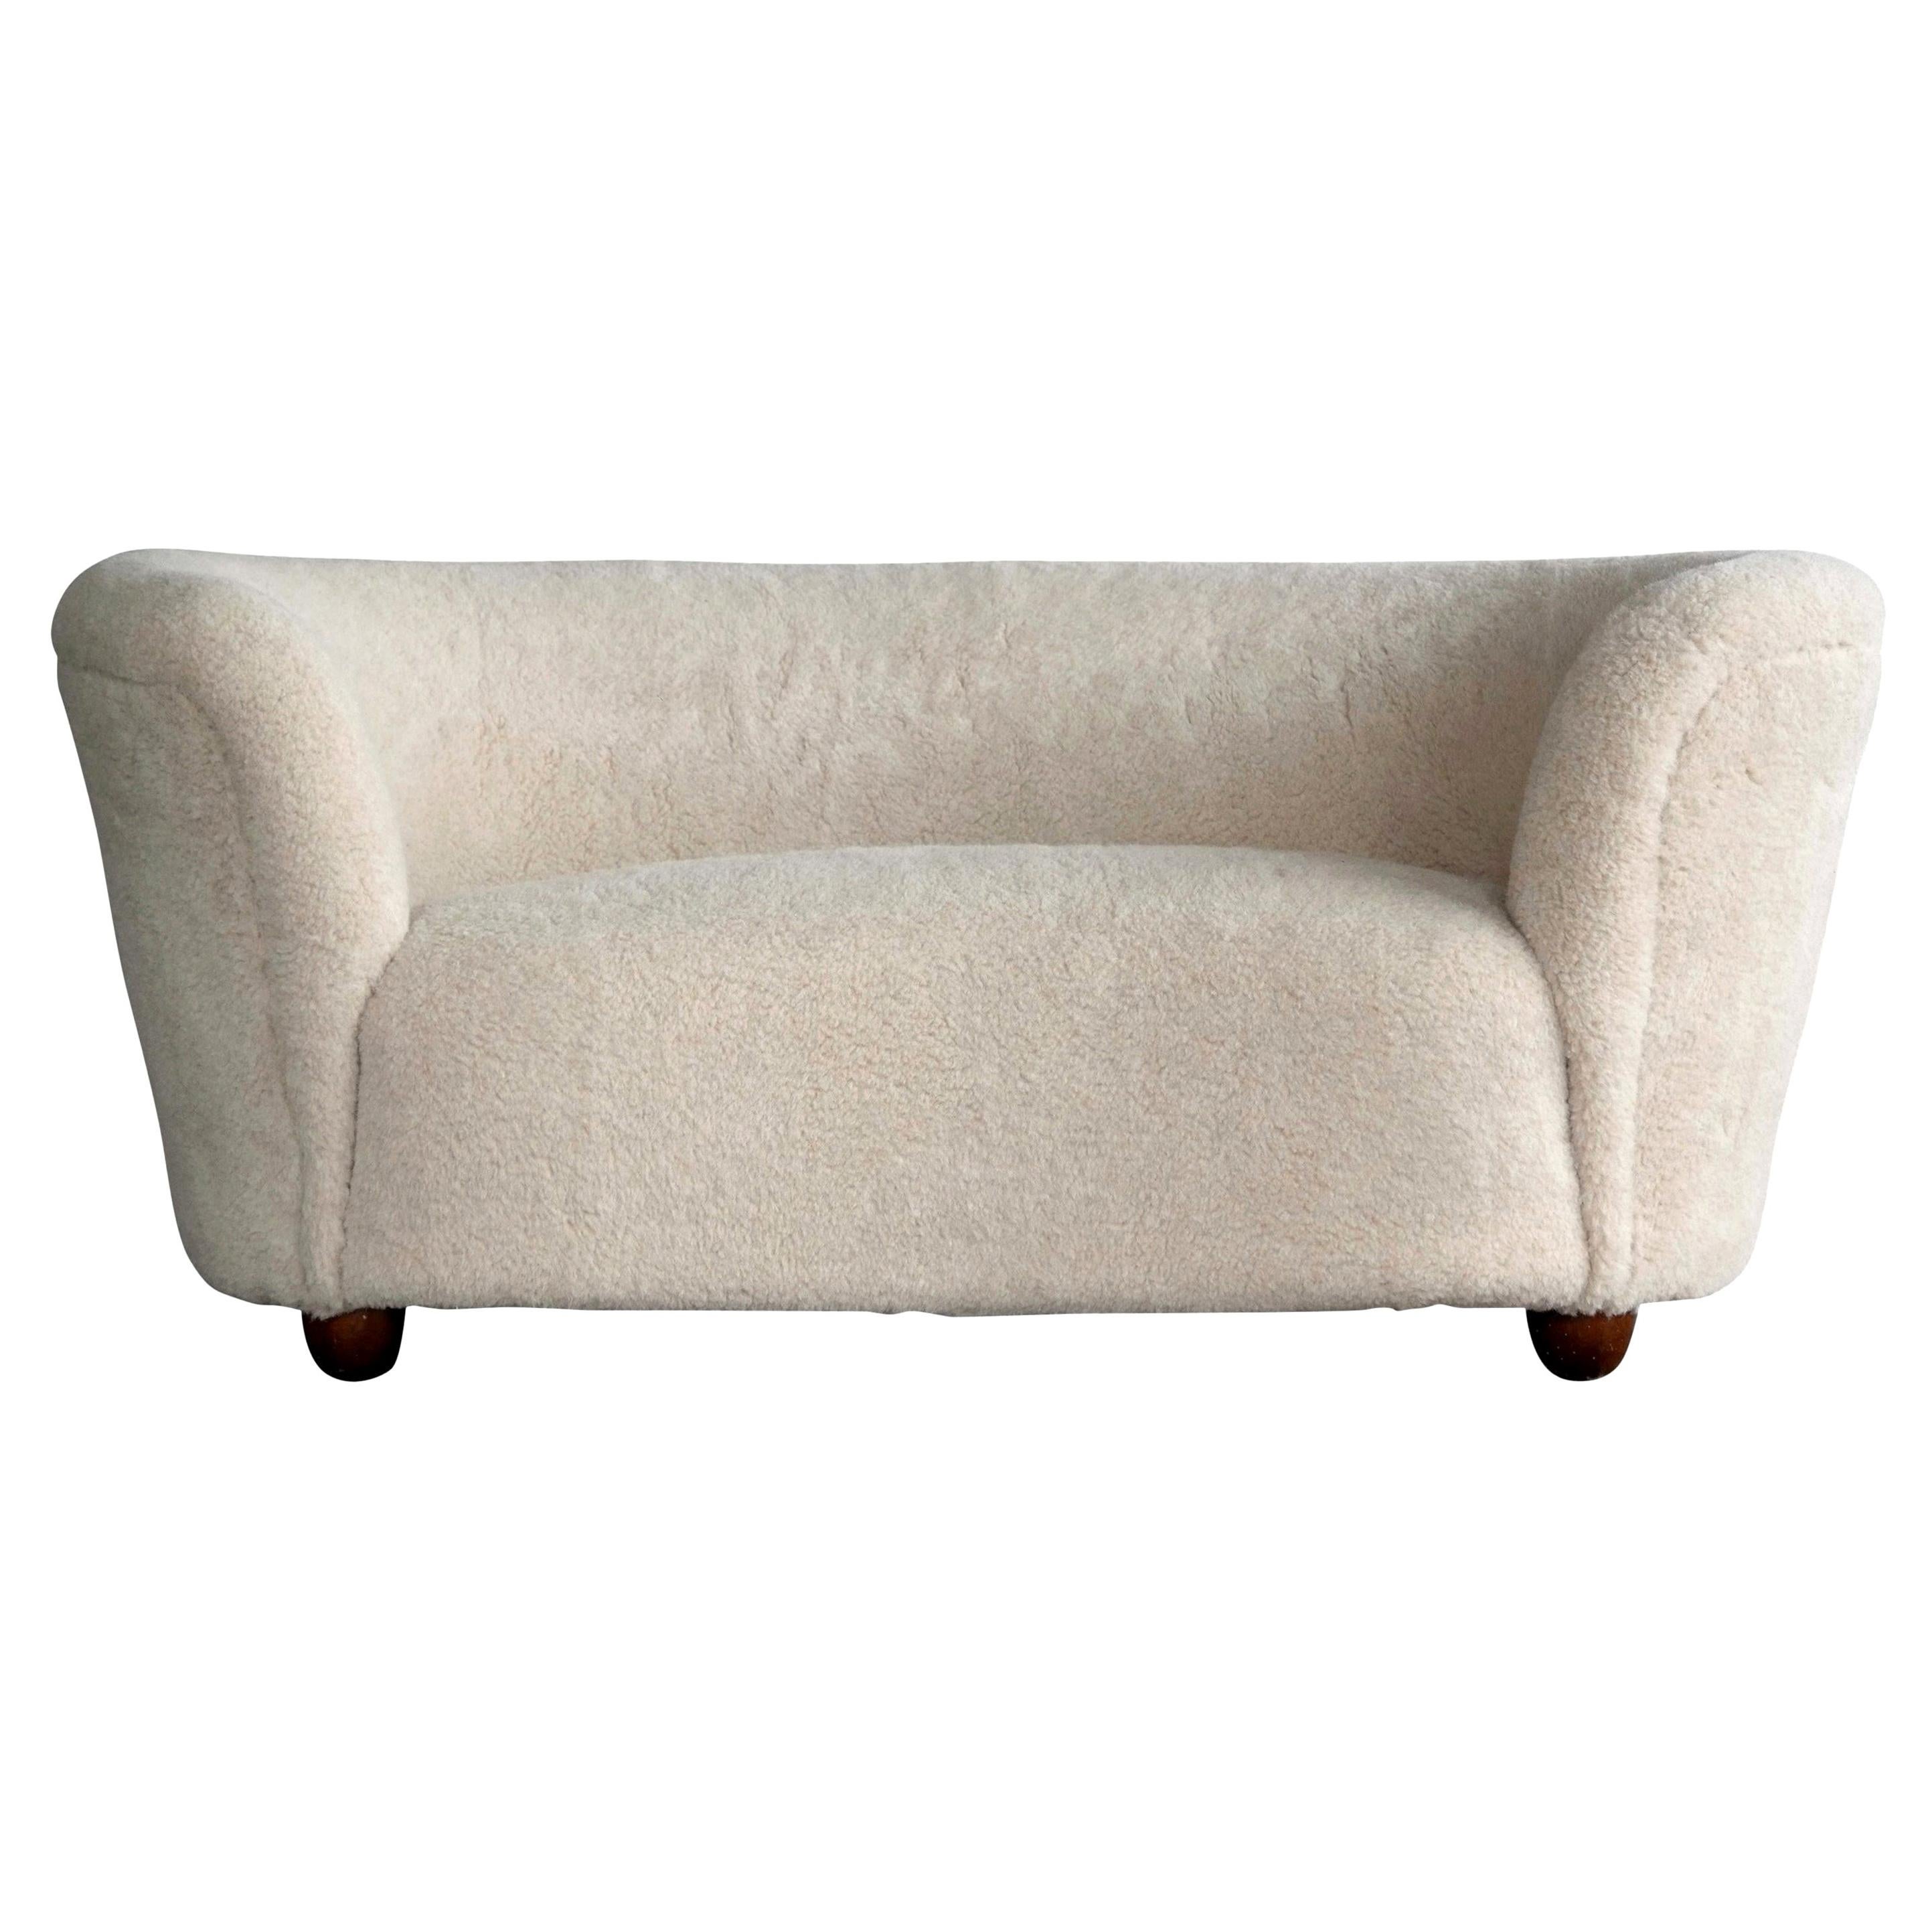 Danish 1940's Banana Shaped Curved Loveseat or Sofa Covered in Lambswool